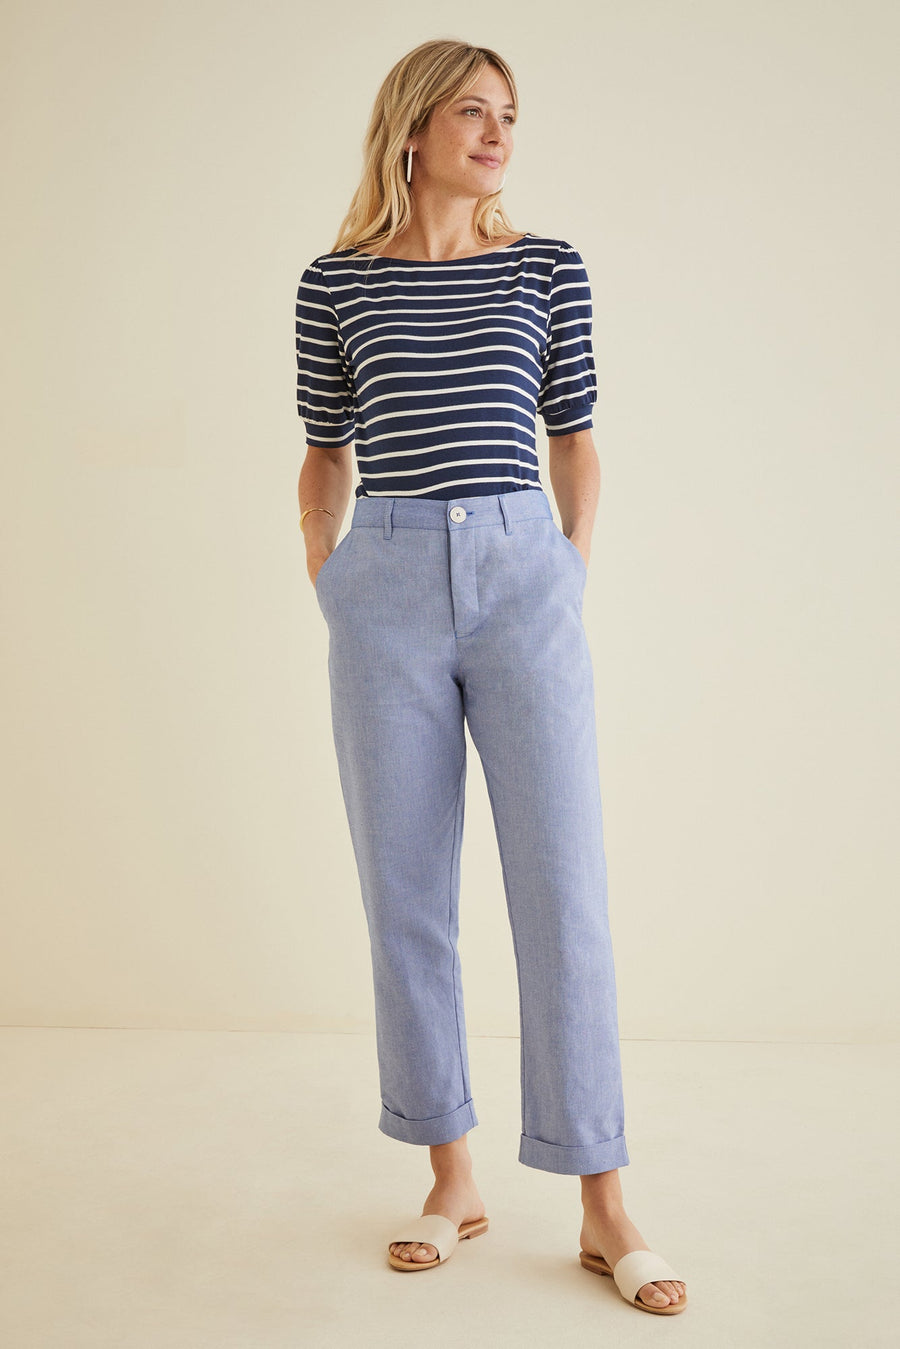 Kowtow Exclusive Edition Pants - Chambray